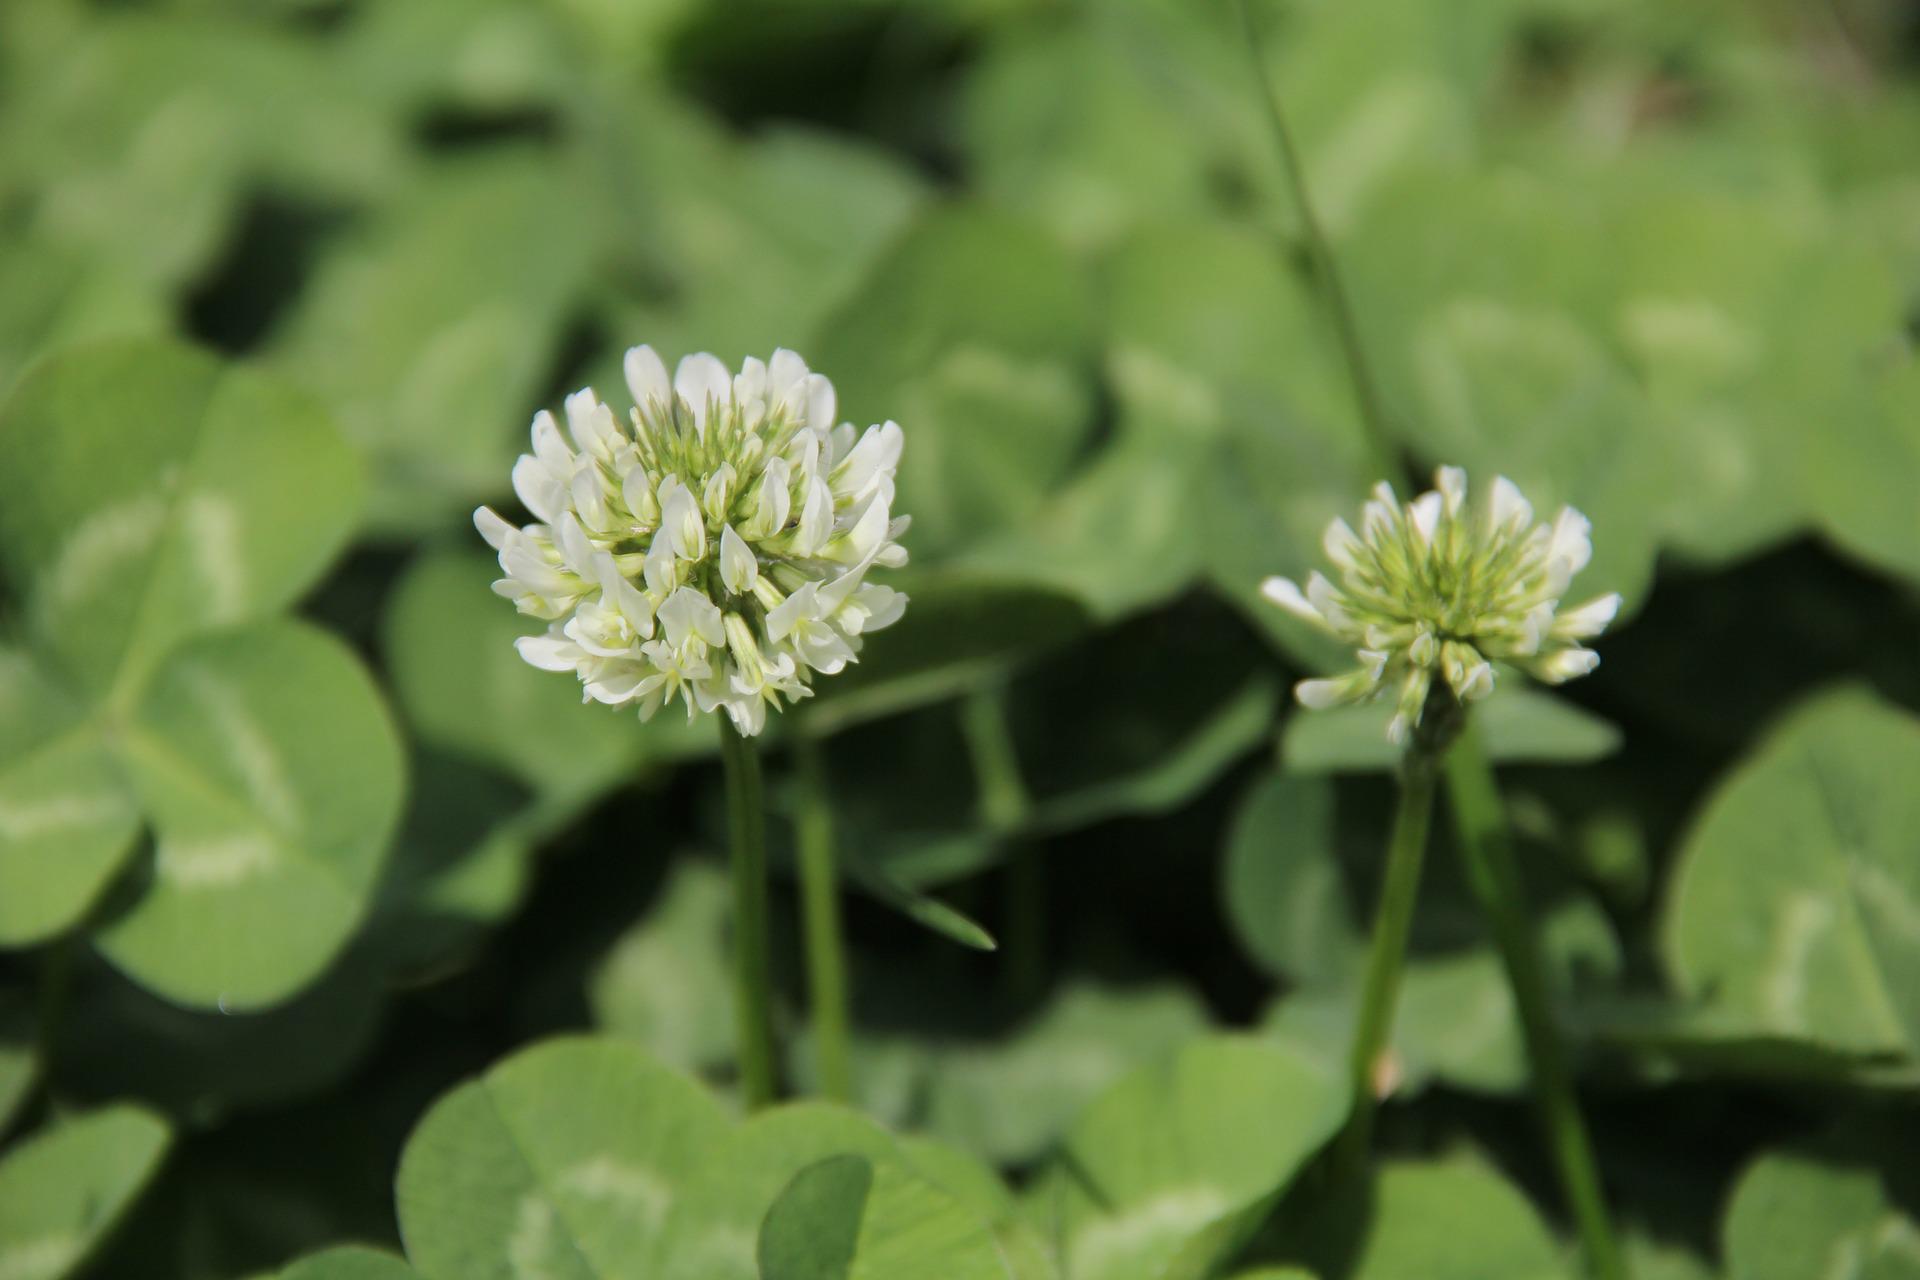 Clover and Microclover